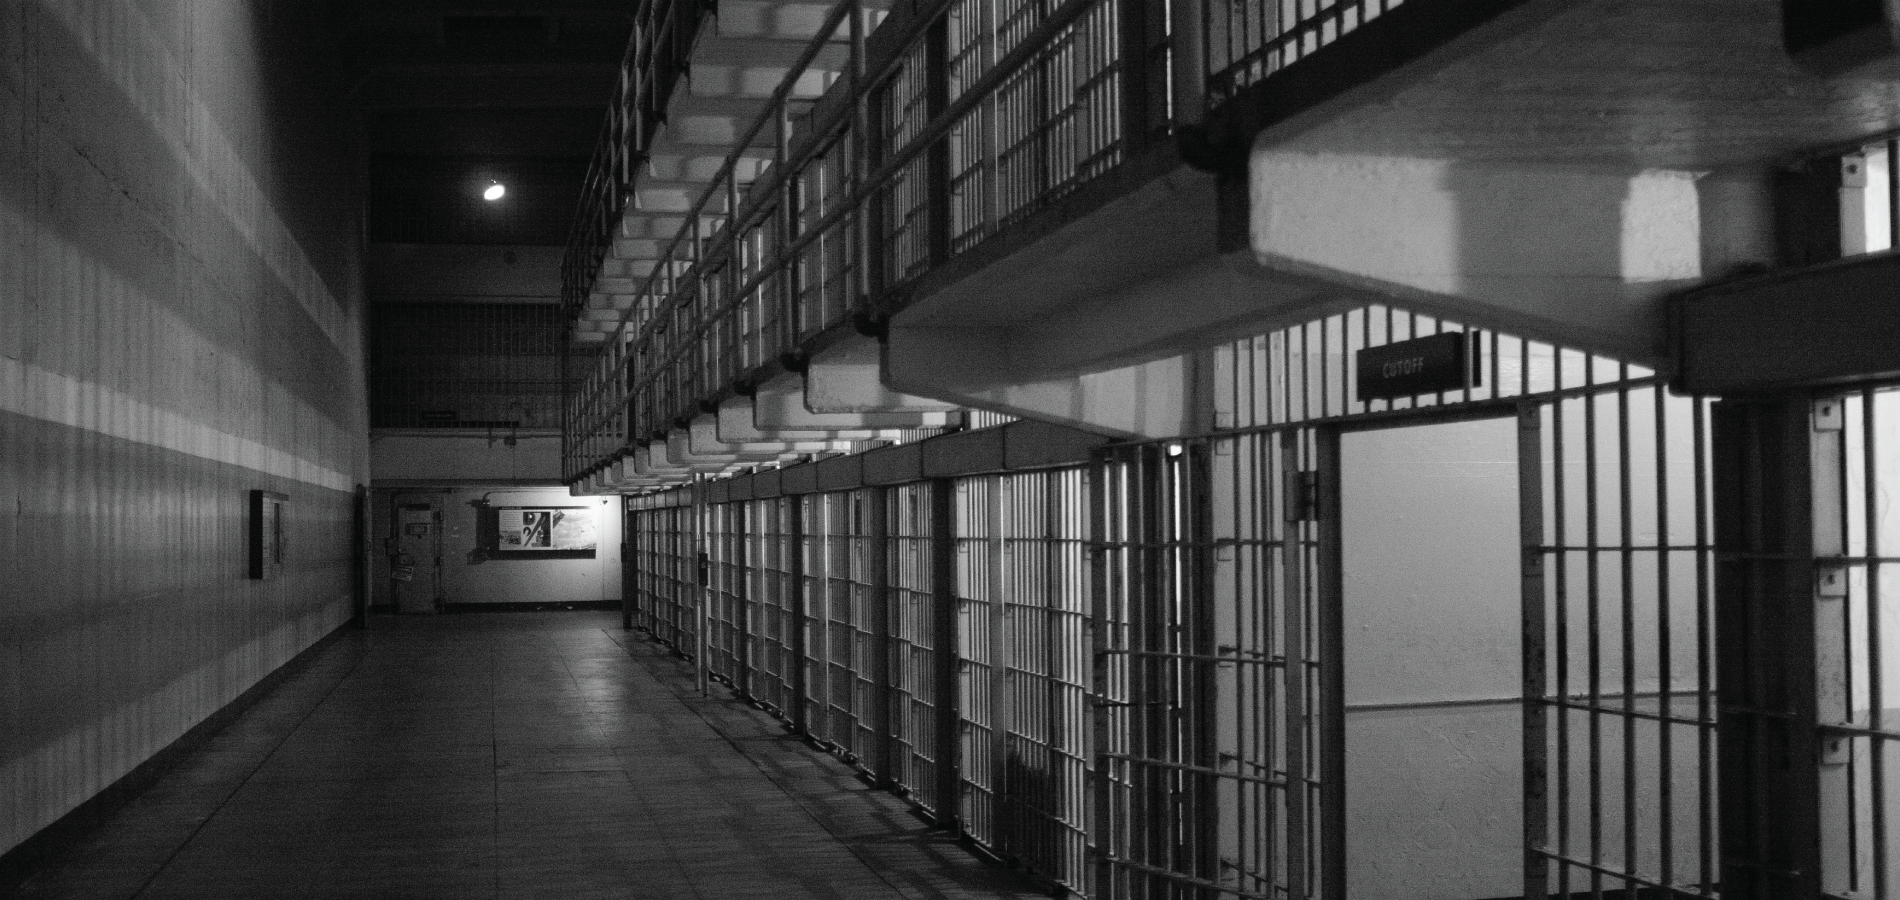 image of inside of a prison